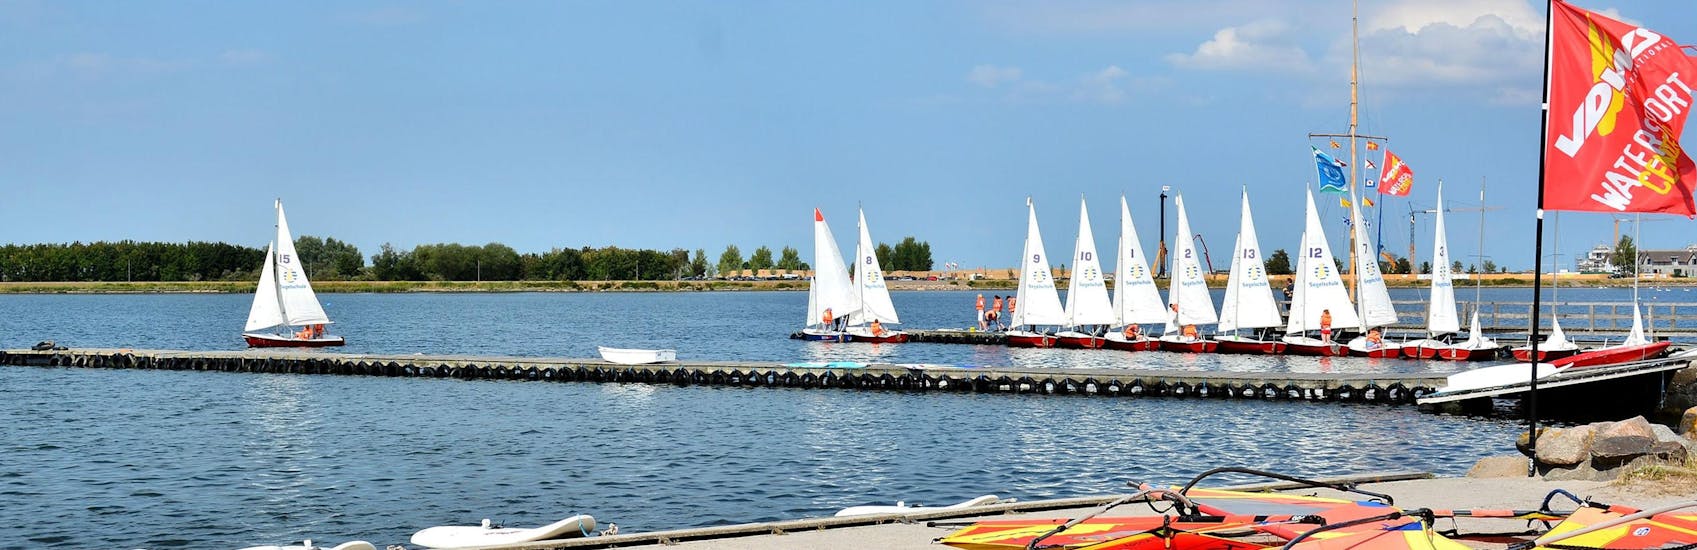 A view of the lake during Windsurfing Lessons "Trial Lesson" with Wassersportcenter Heiligenhafen.